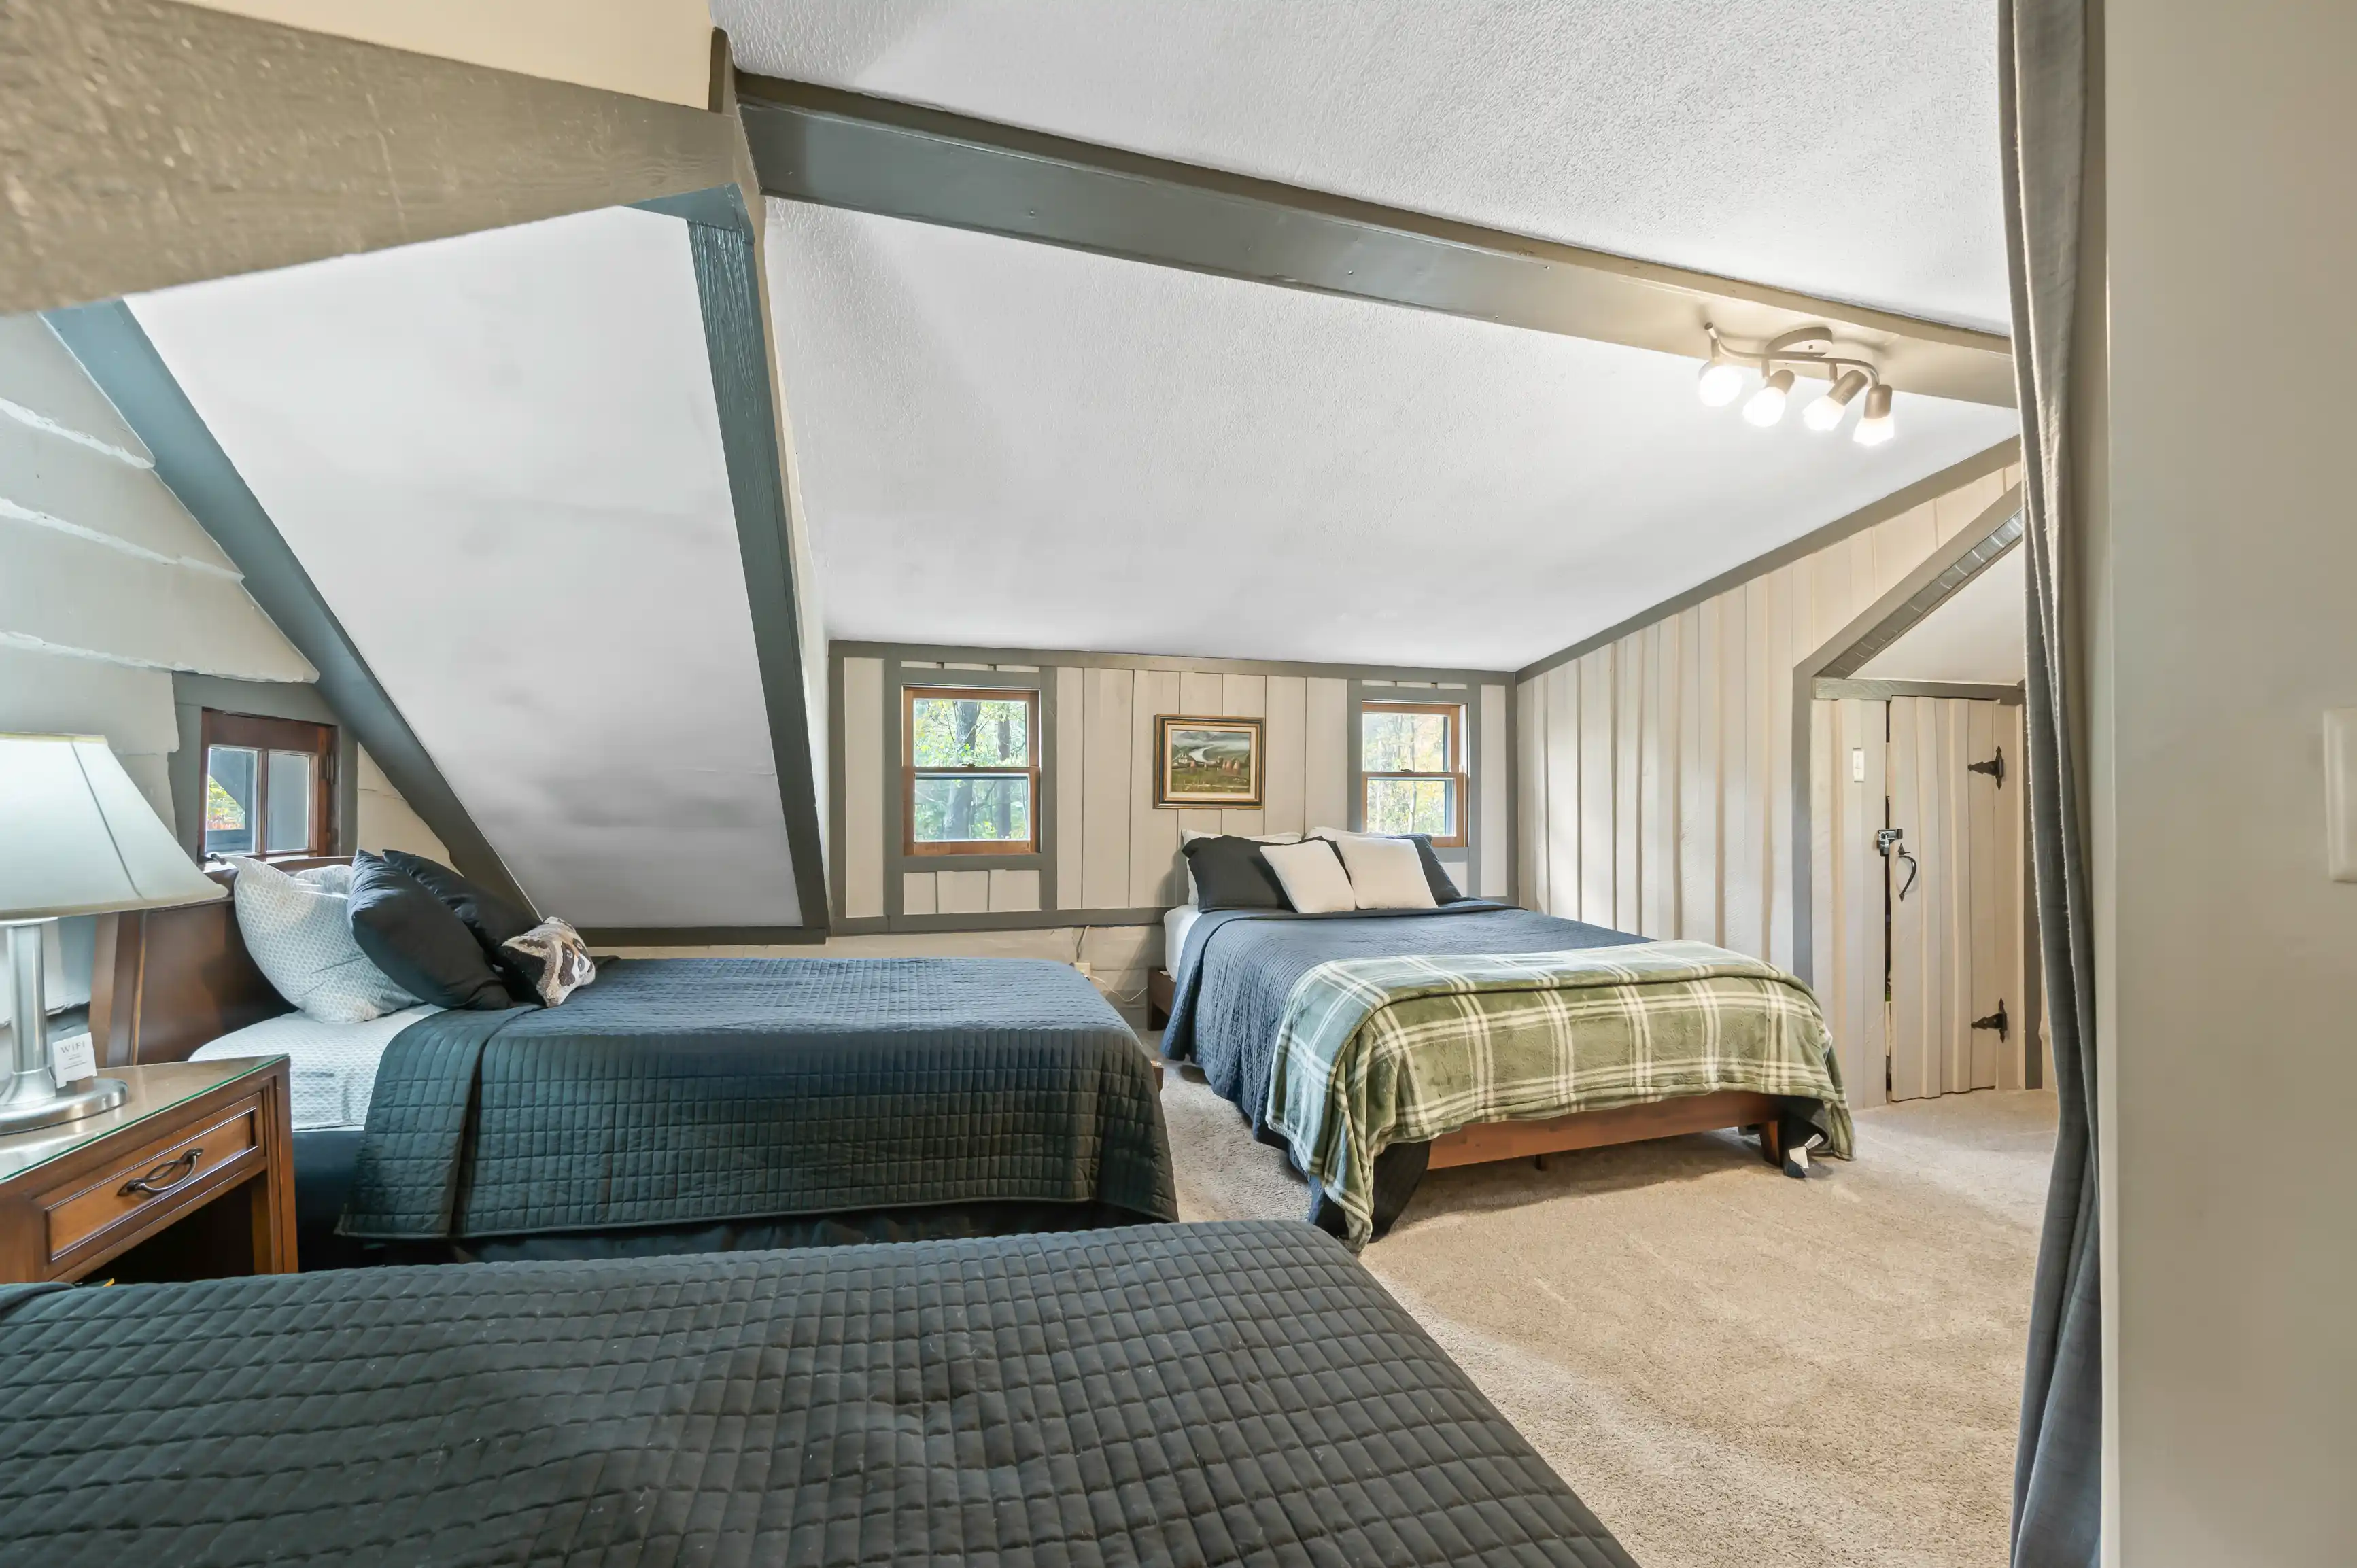 Bright and cozy attic bedroom interior with sloped ceilings, two beds with quilts, nightstands with lamps, framed artwork, and a carpeted floor.